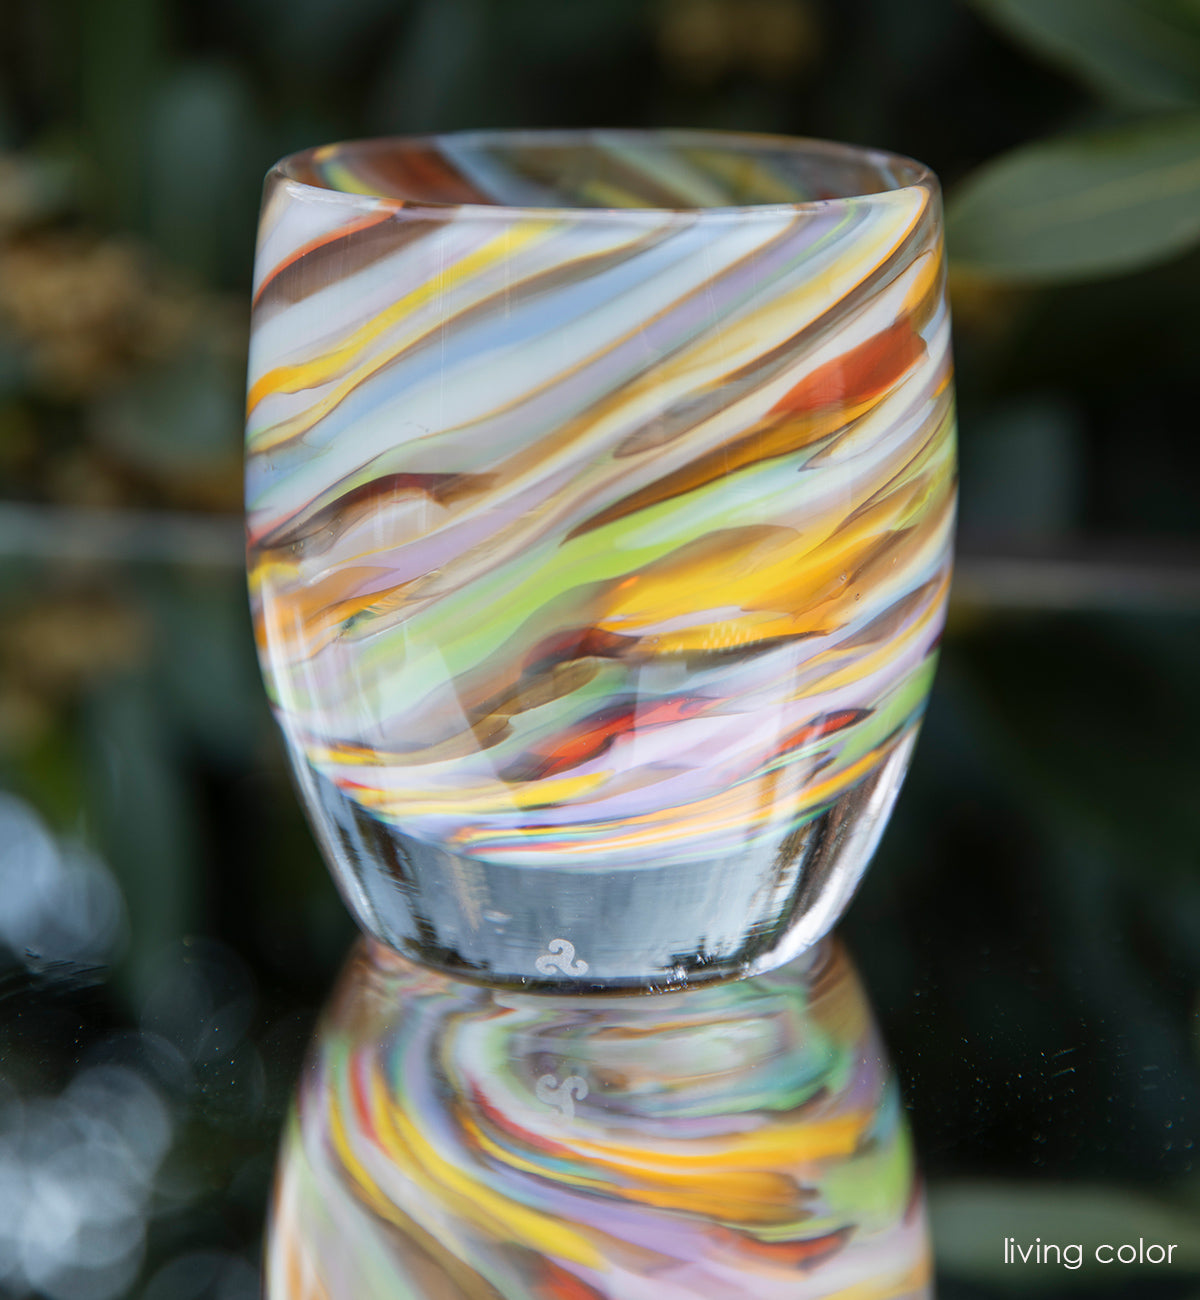 multi-colored blue, brown, yellow, red, purple, green swirl hand-blown glass votive candle holder sitting on a reflective table outside. 